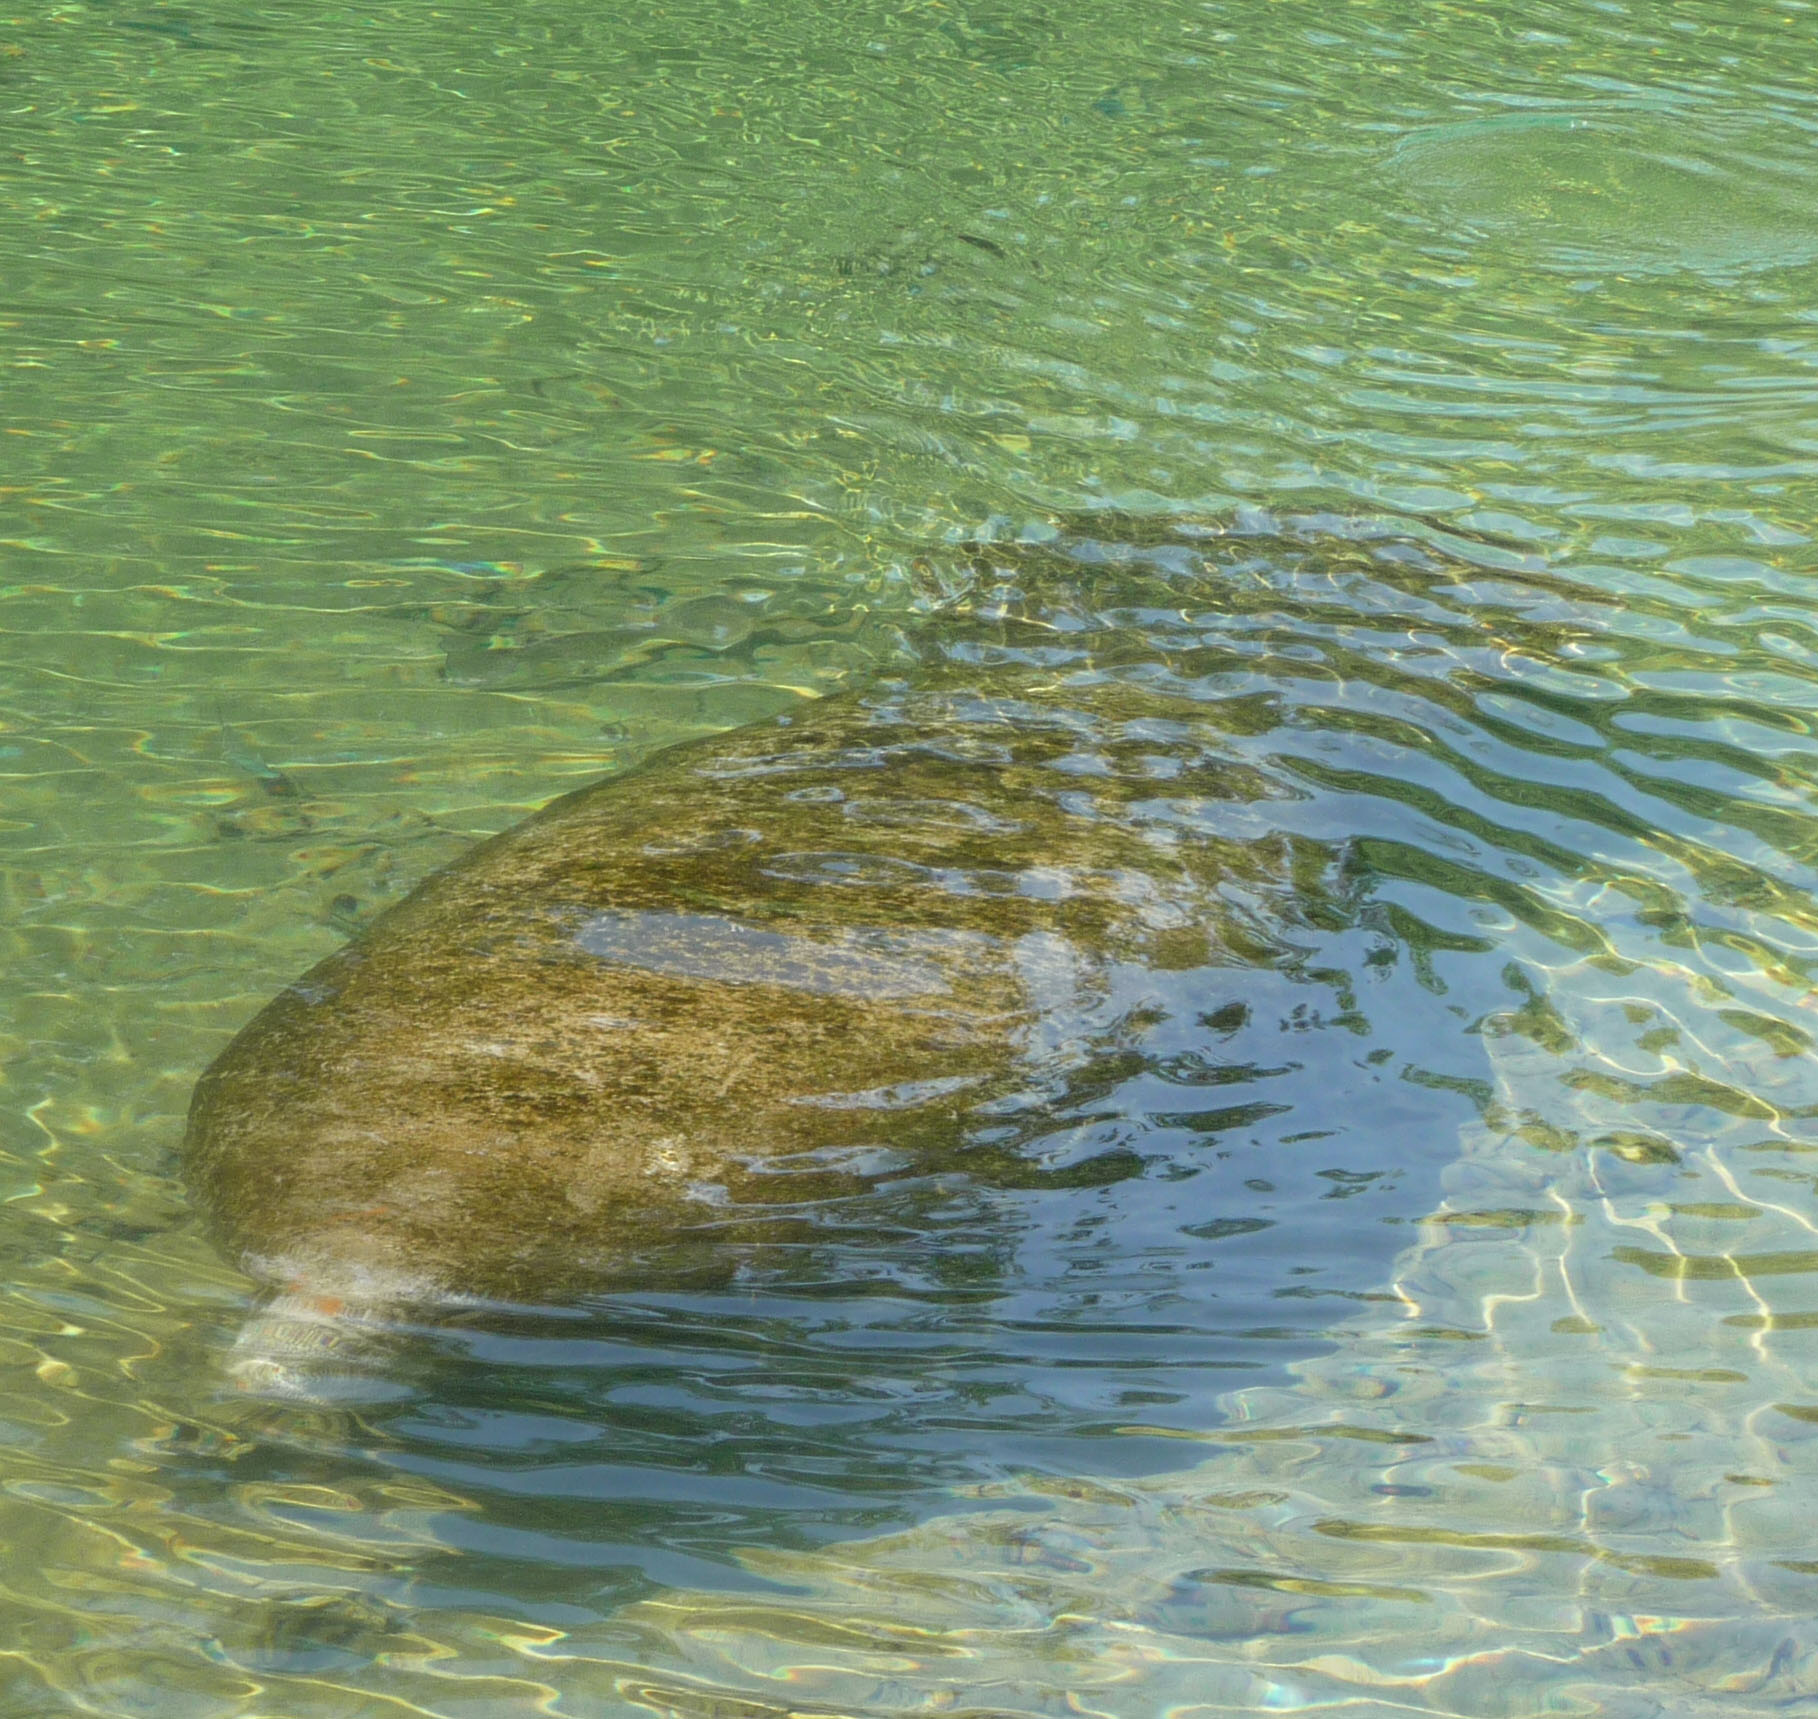 West Indian manatees – see them in Florida